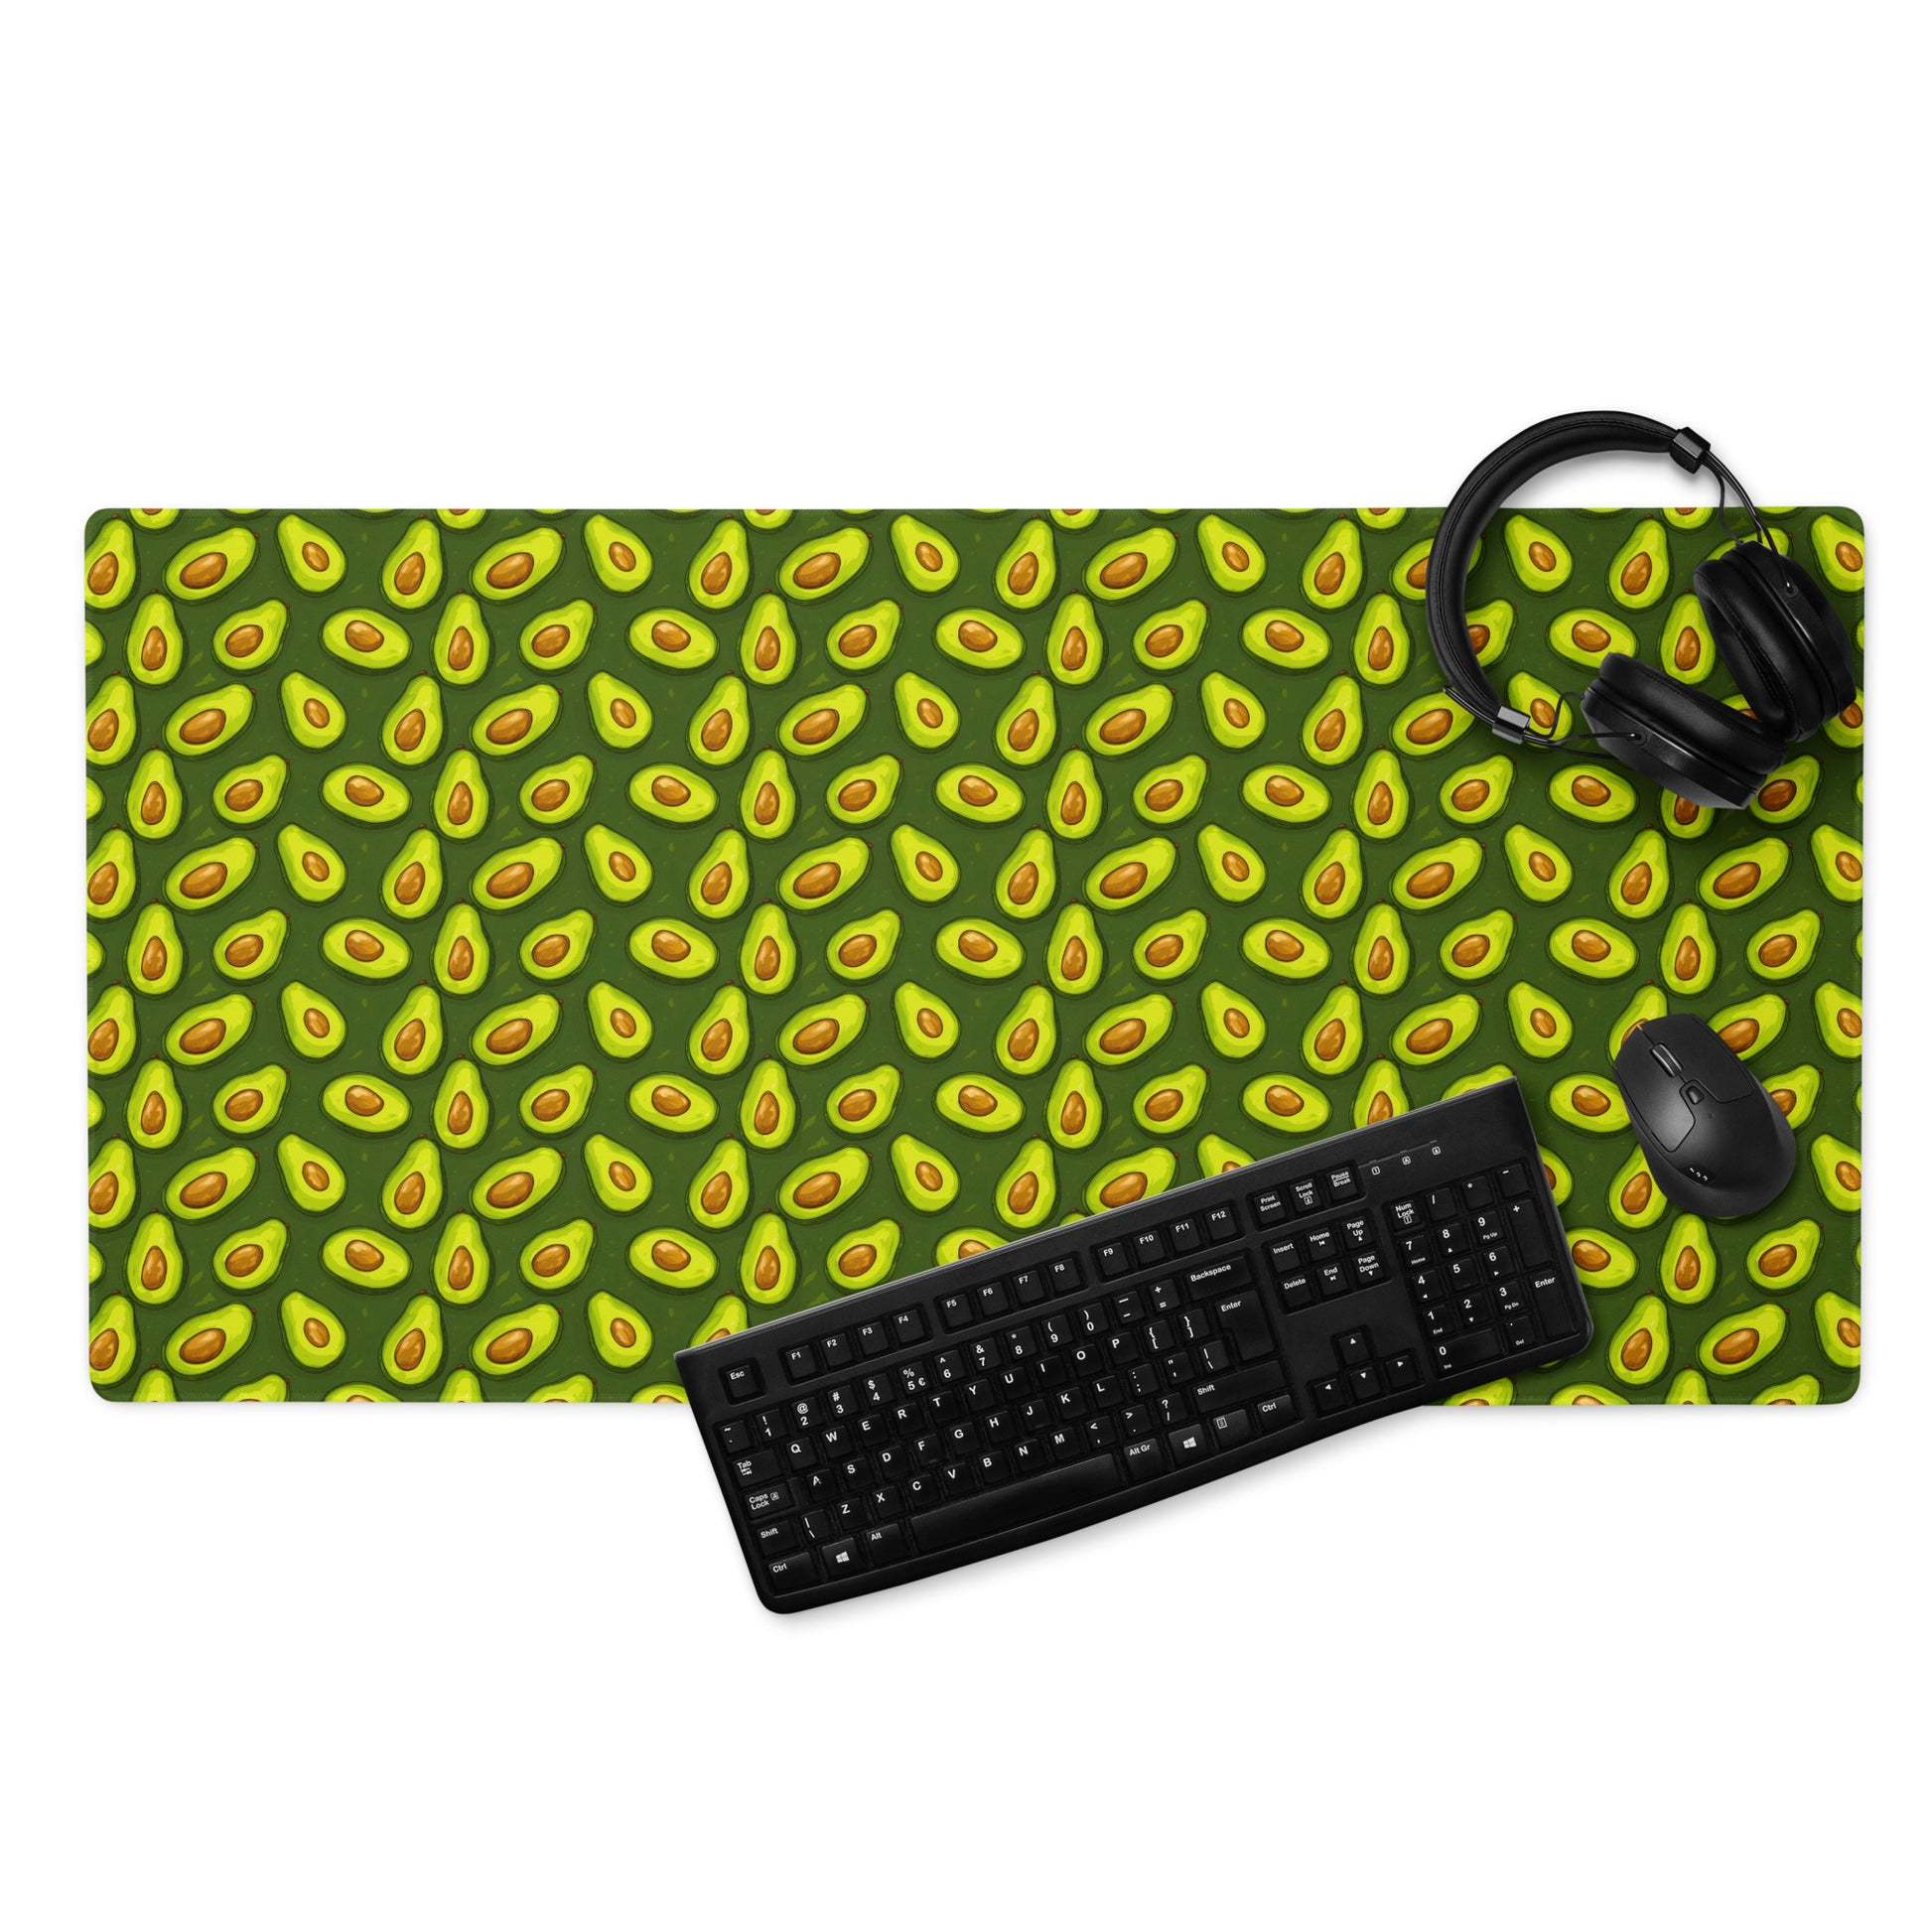 A 36" x 18" desk pad with lots of avocados on it displayed with a keyboard, headphones and a mouse on it. Green in color.